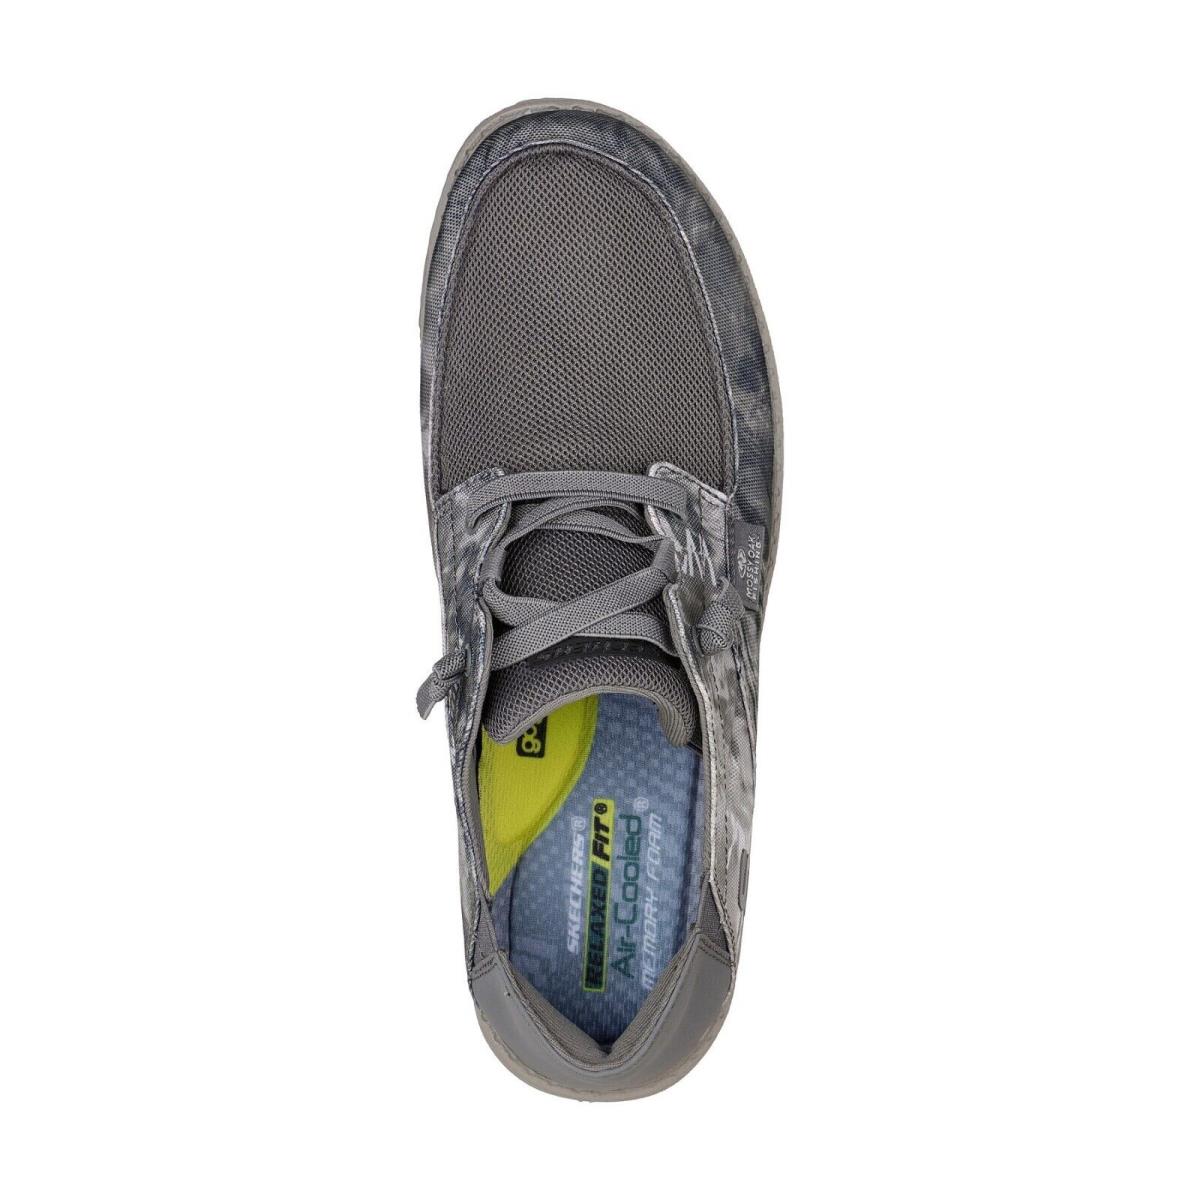 Skechers shoes Melson Topher - Gray 0